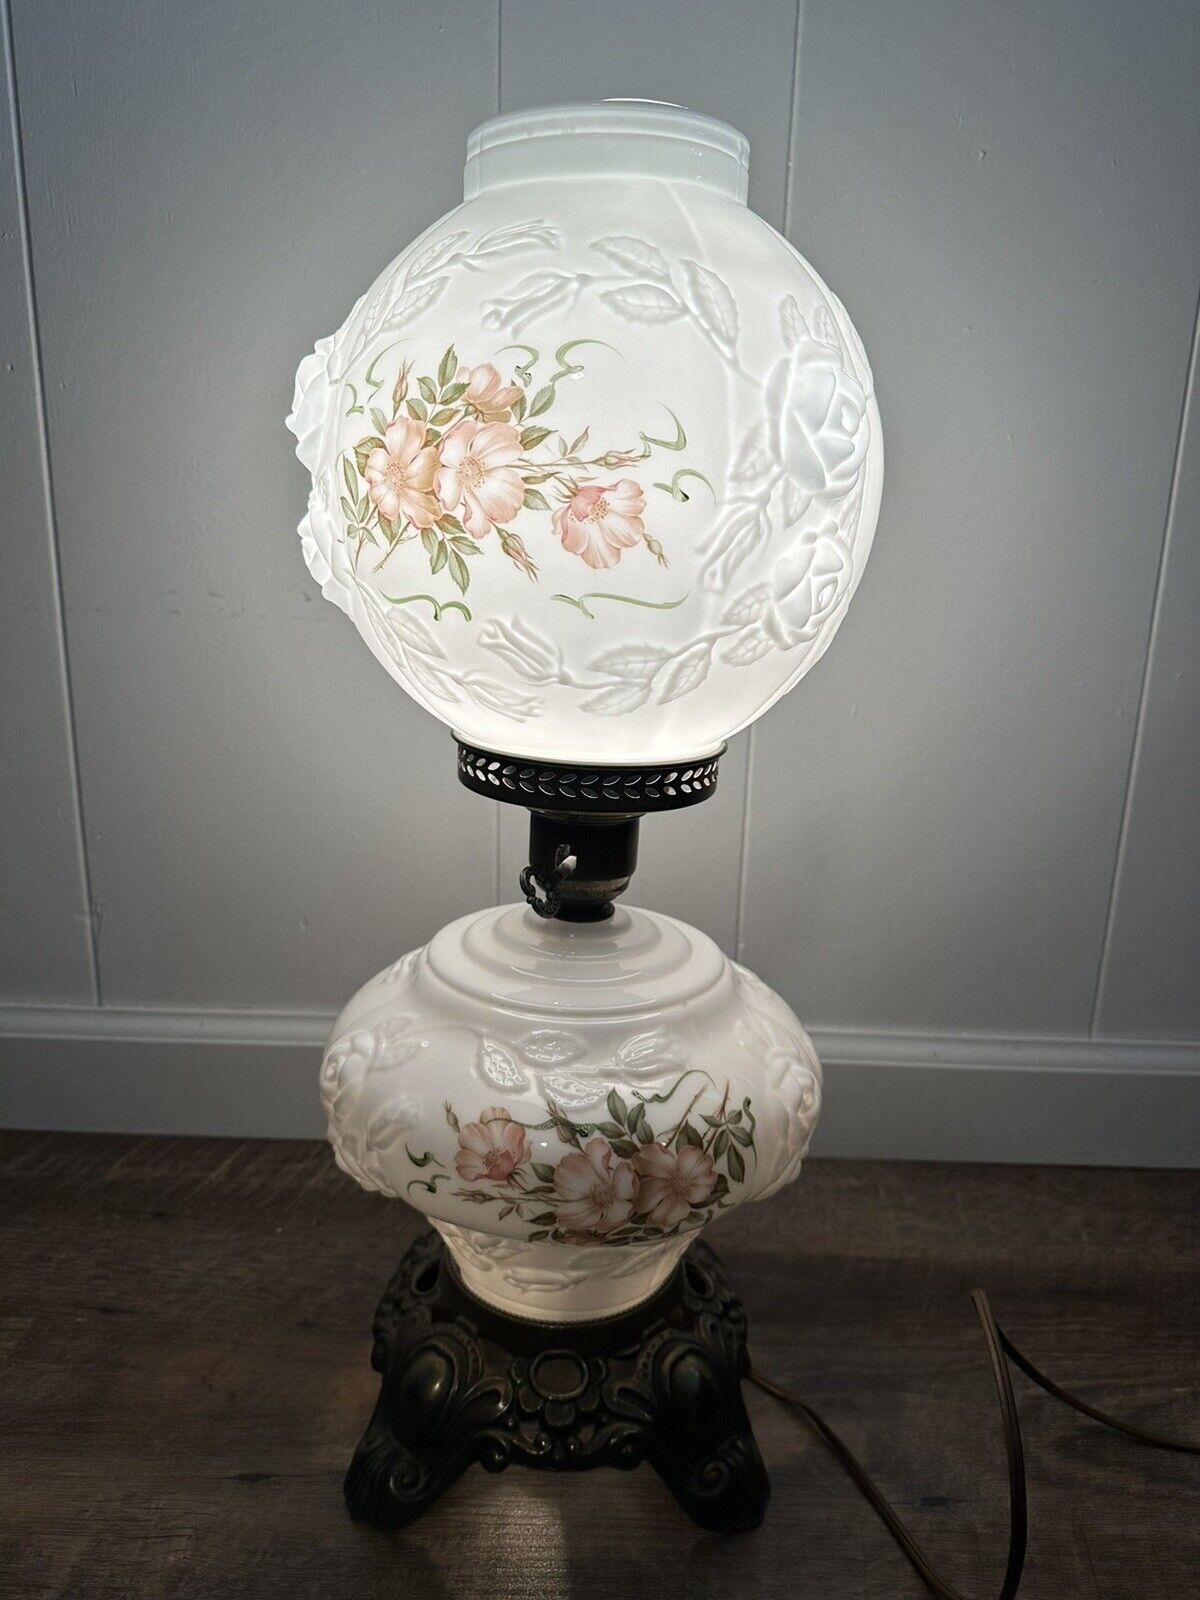 Vintage Gone With The Wind Ornate Milk Glass Lamp With Rose Design 3 Way Lamp